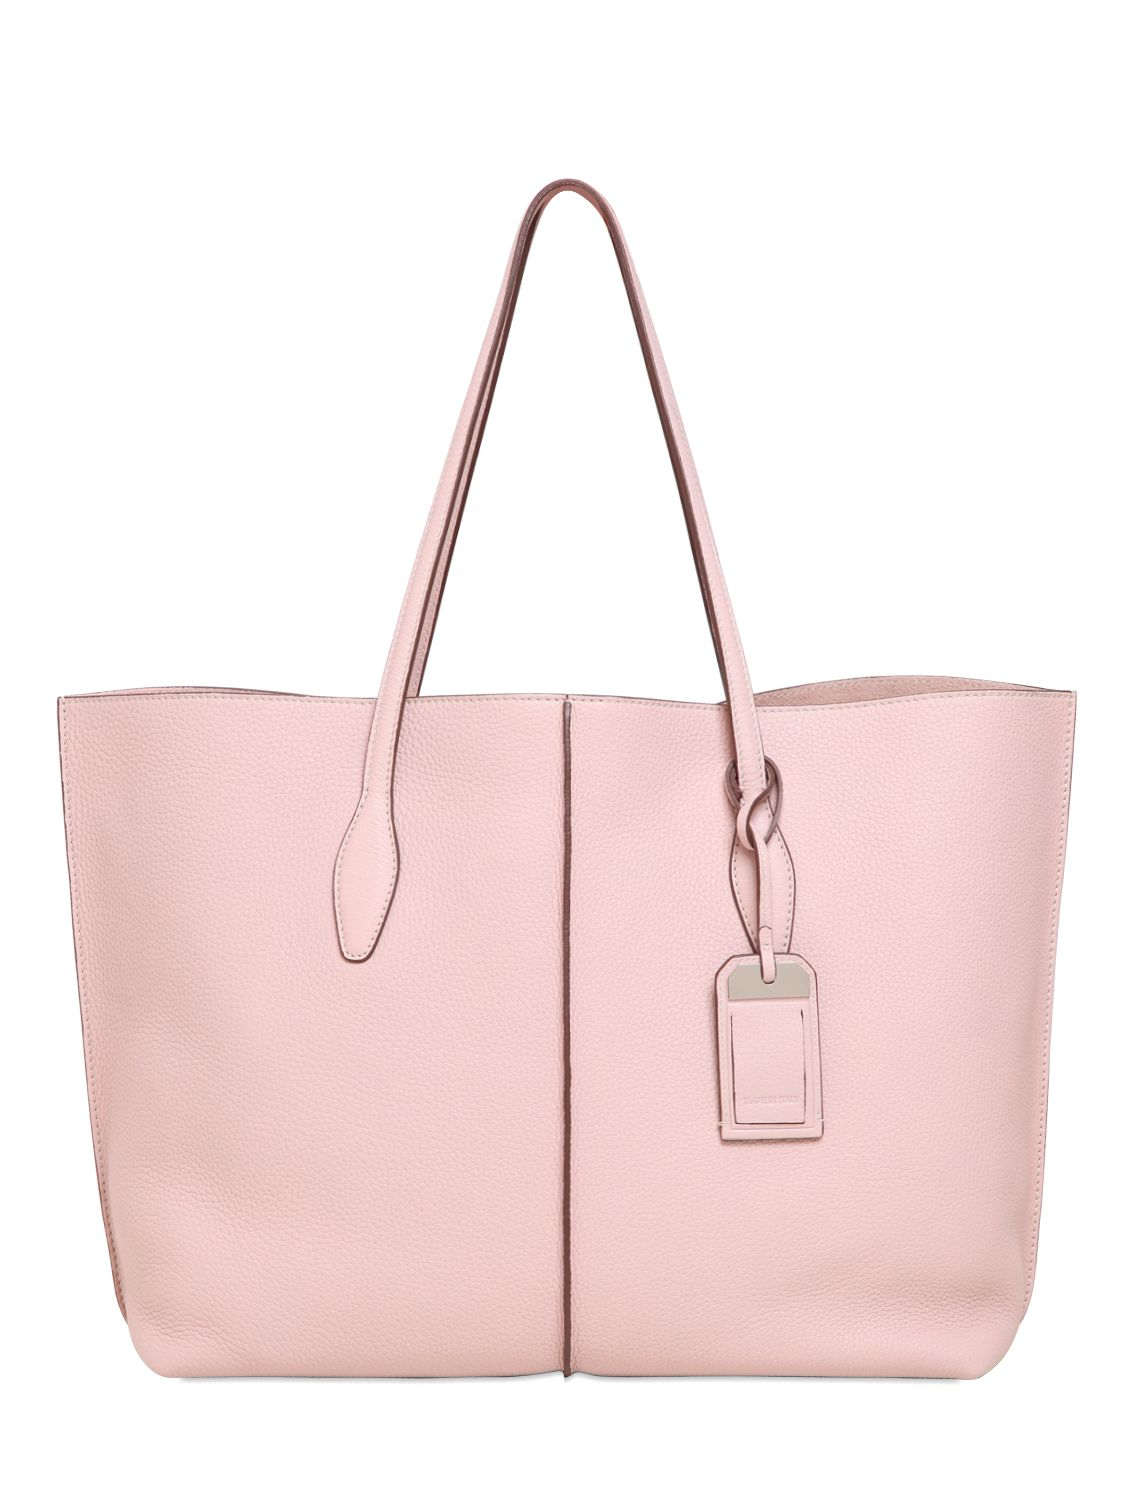 Lyst - Tod'S Large Joy Textured Leather Tote Bag in Pink